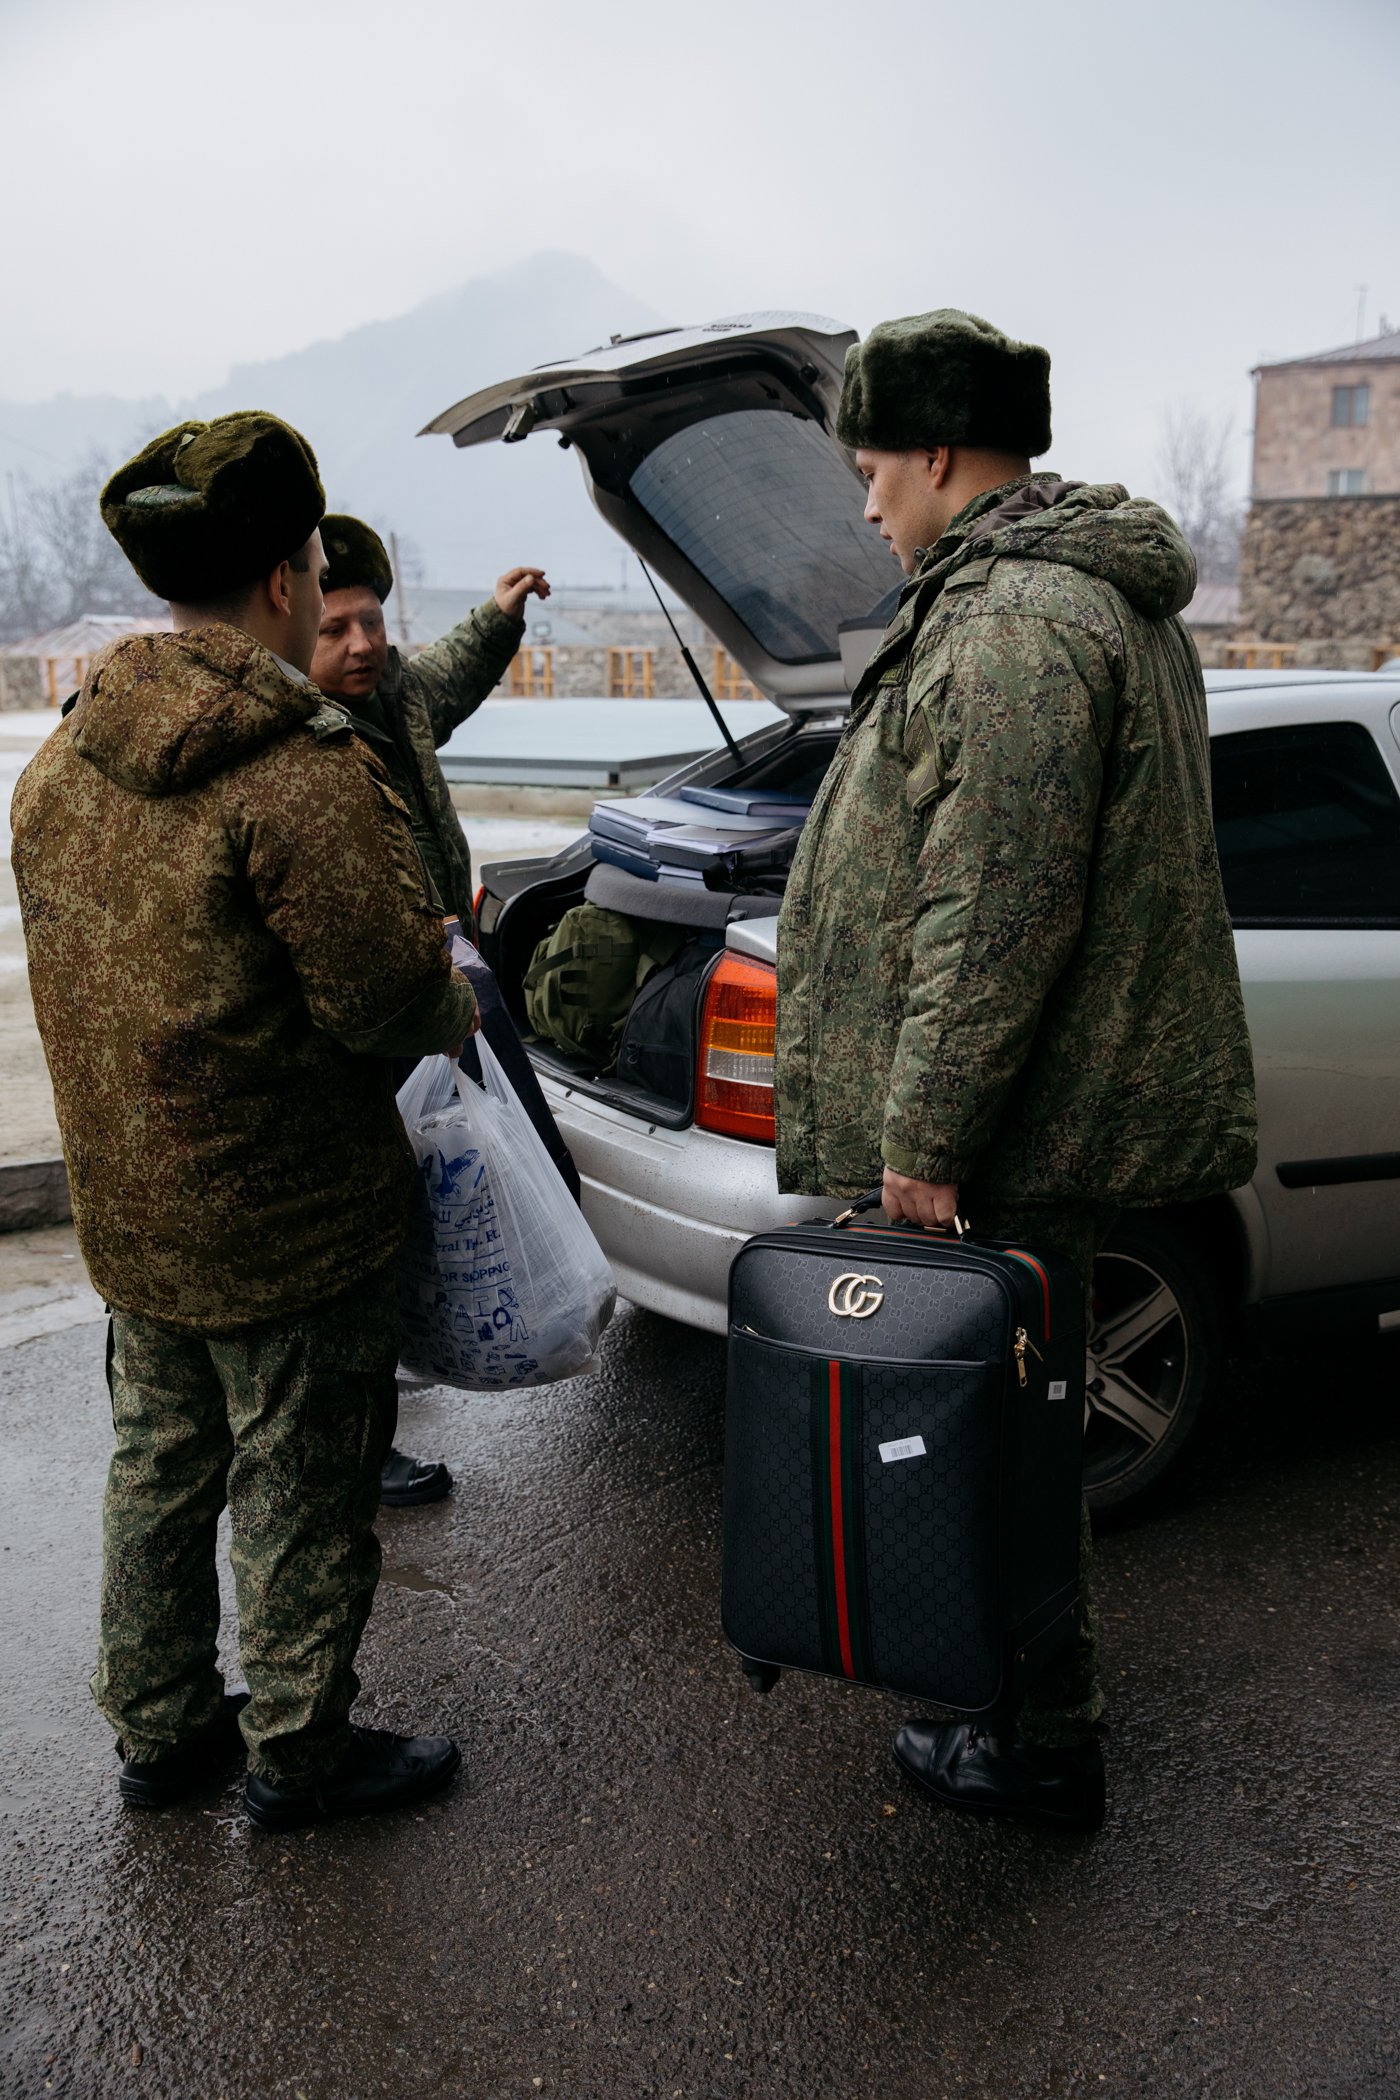  Russian soldiers outside the Hotel Goris, one carrying the luggage of a female acquaintance who left with them. 